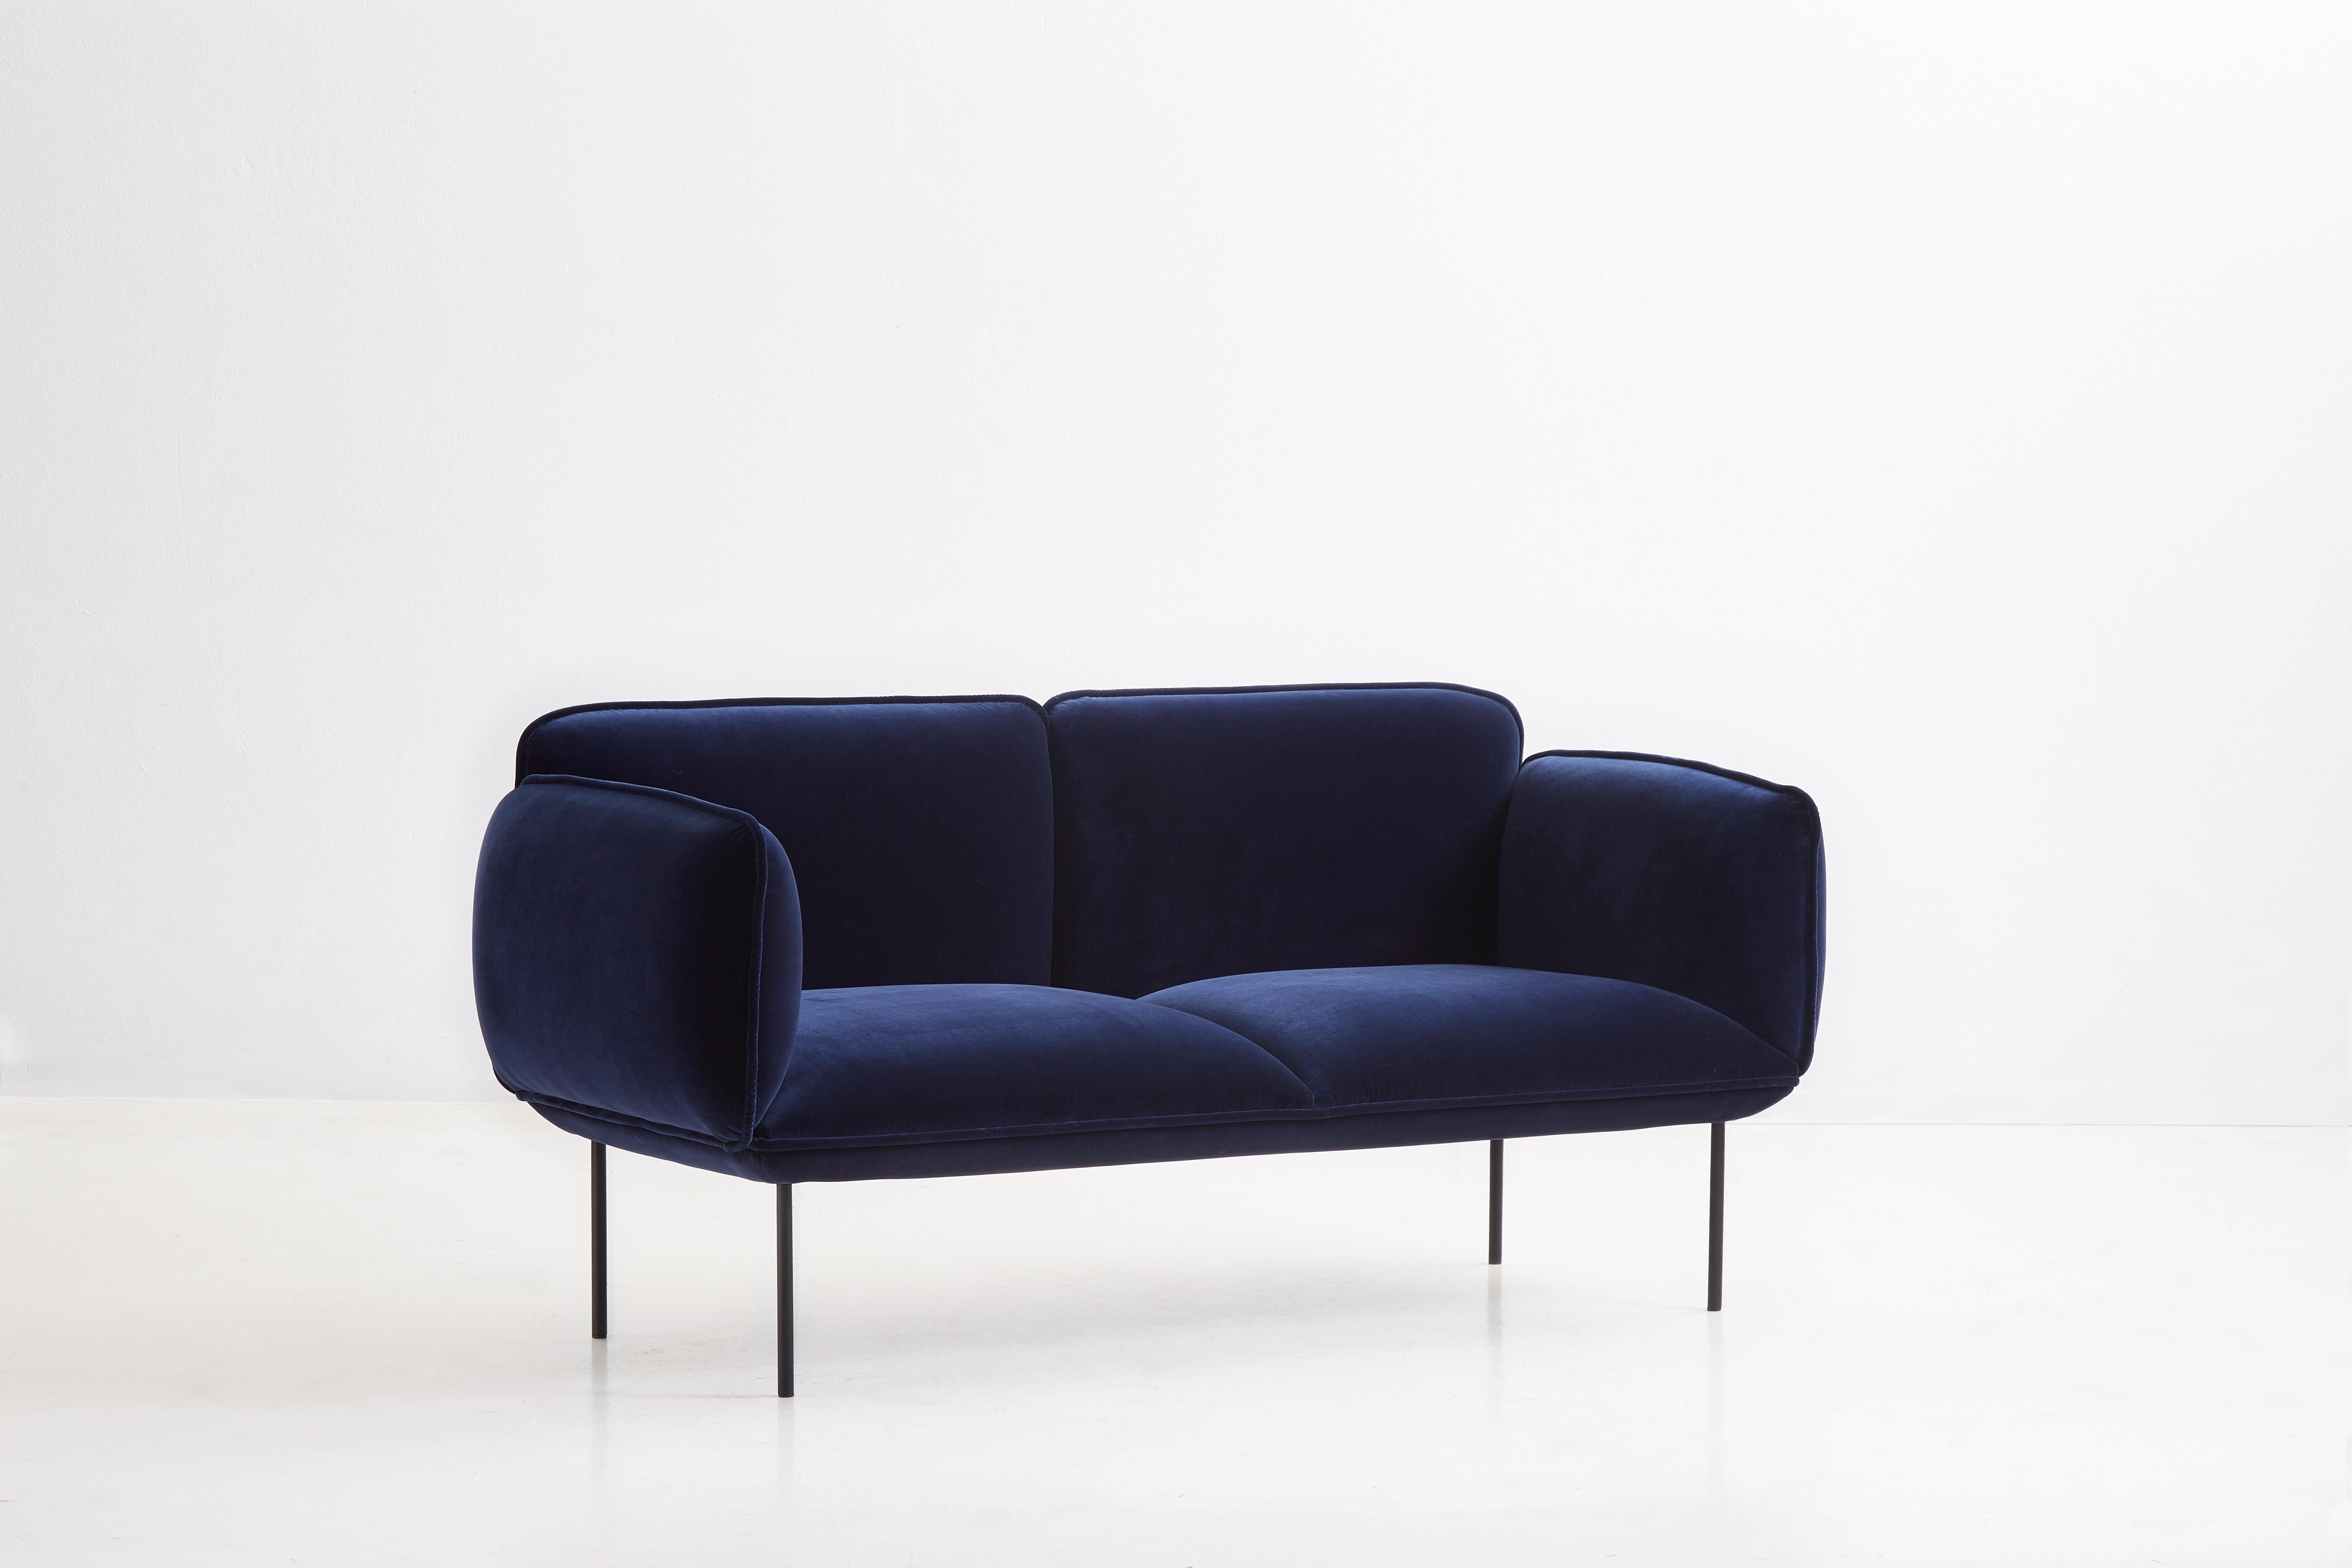 Nakki seater 2 by Mika Tolvanen.
Materials: Foam, plywood, elastic belts, memory foam, fabric (Harald 3, 0182).
Dimensions: D 78 x W 180 x H 83 cm.
Also available in different colours and materials.

The founders, Mia and Torben Koed, decided